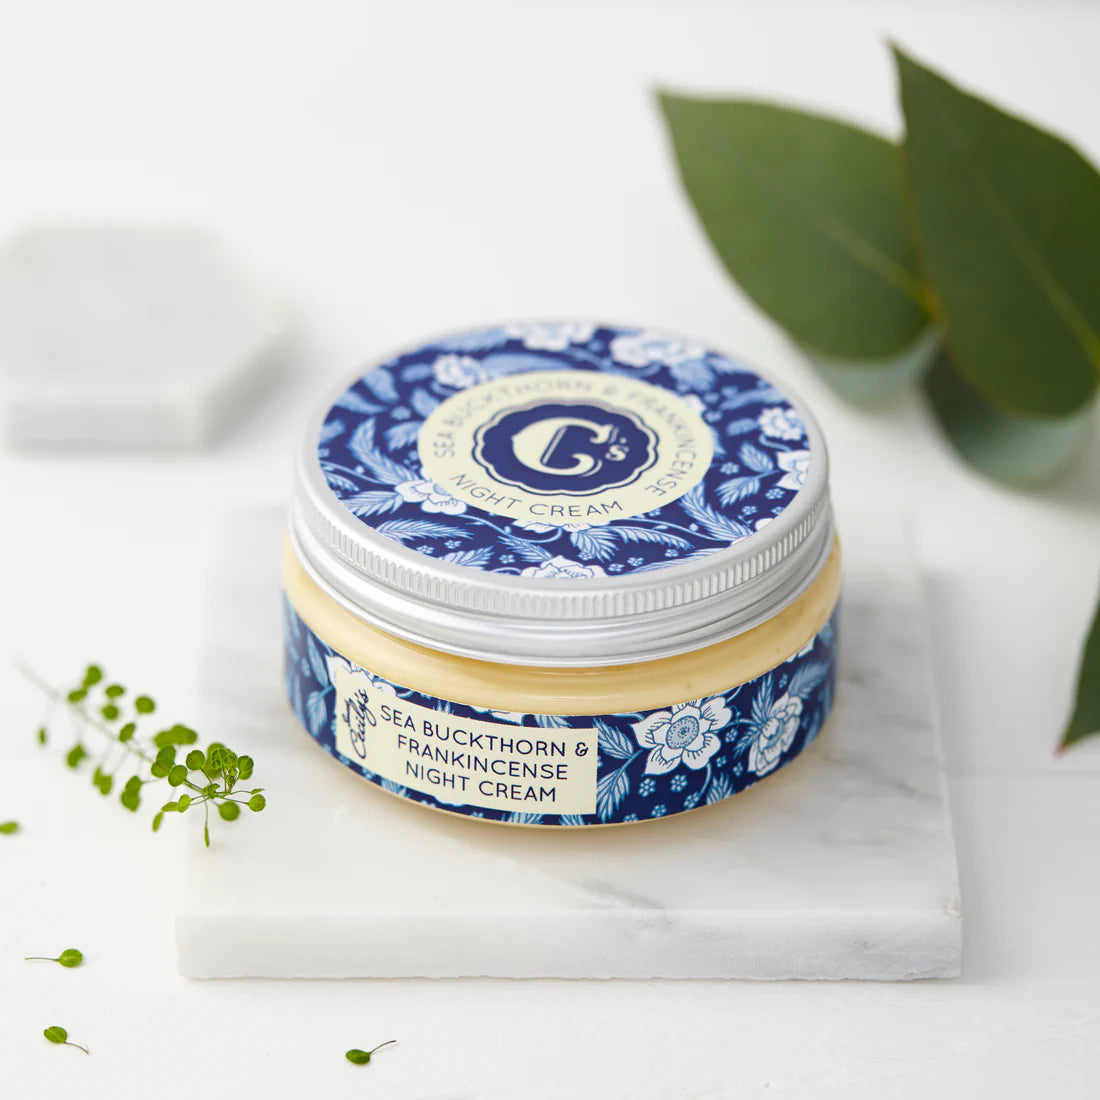 Sweet Cecily's Sea Buckthorn and Frankincense Night Cream